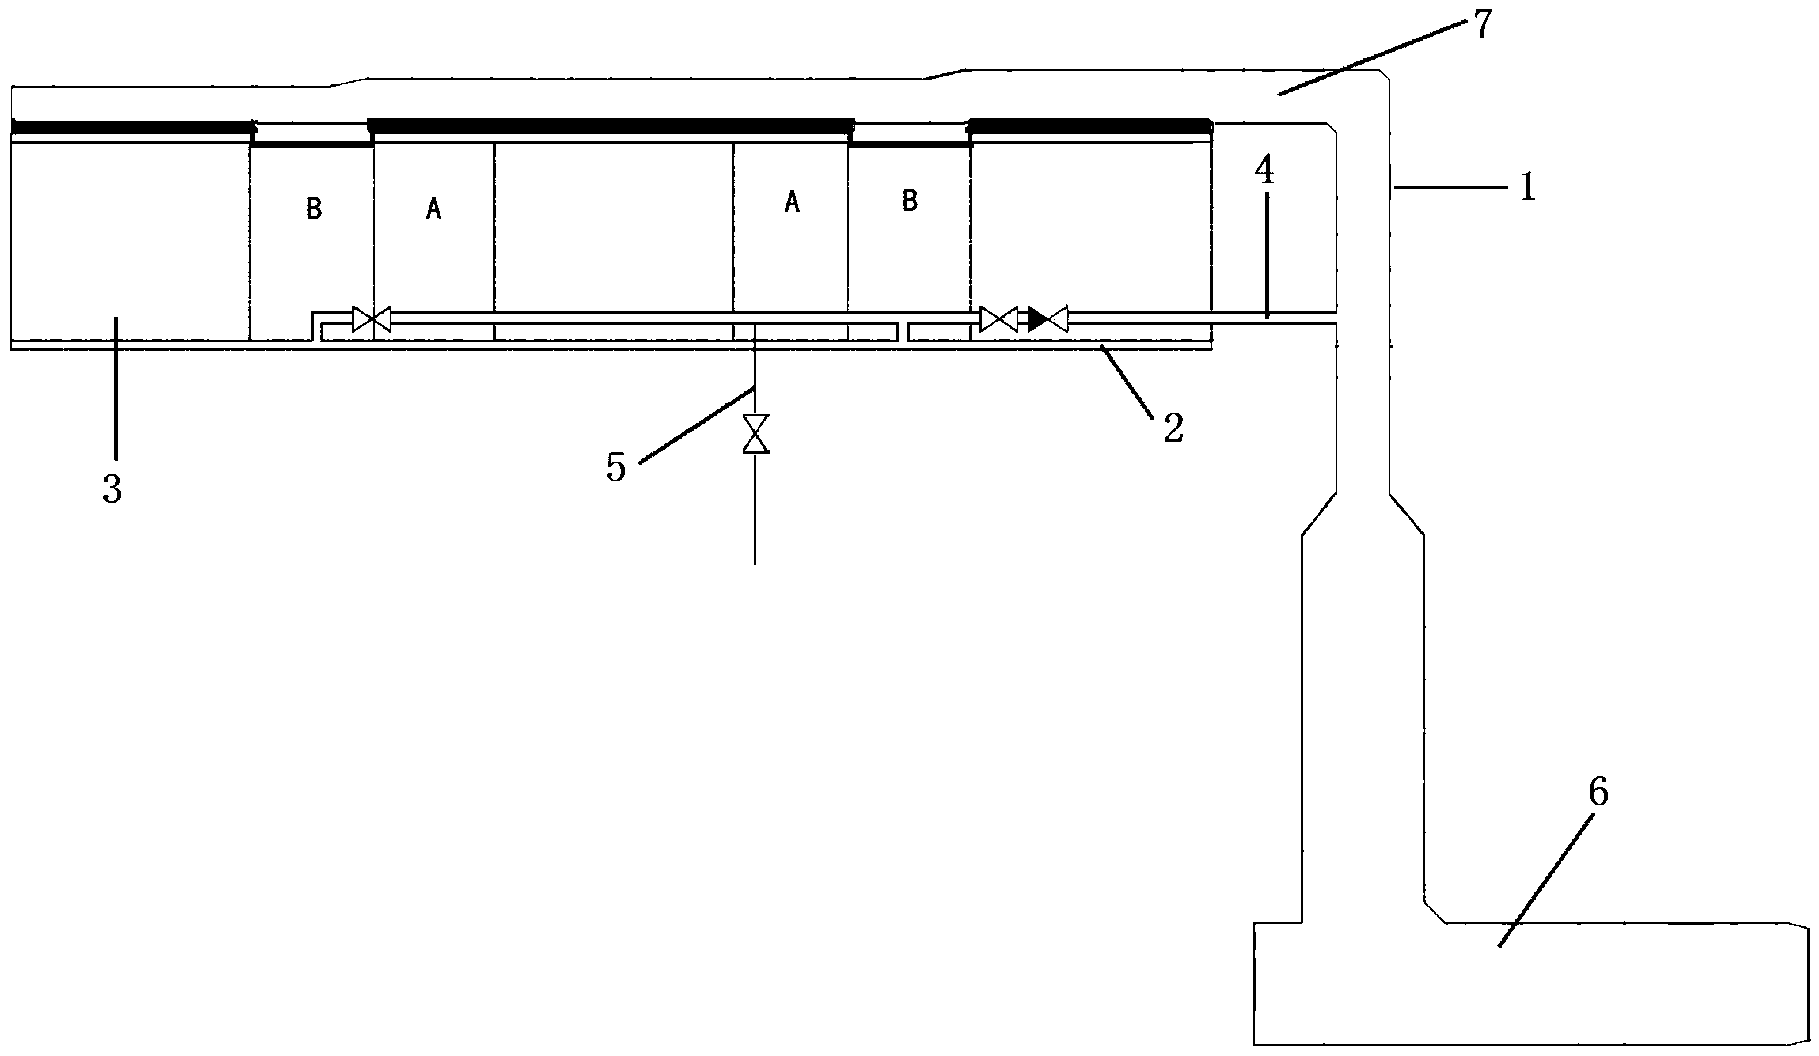 Steam discharge pipeline structure for directly preventing freezing of air condenser in winter